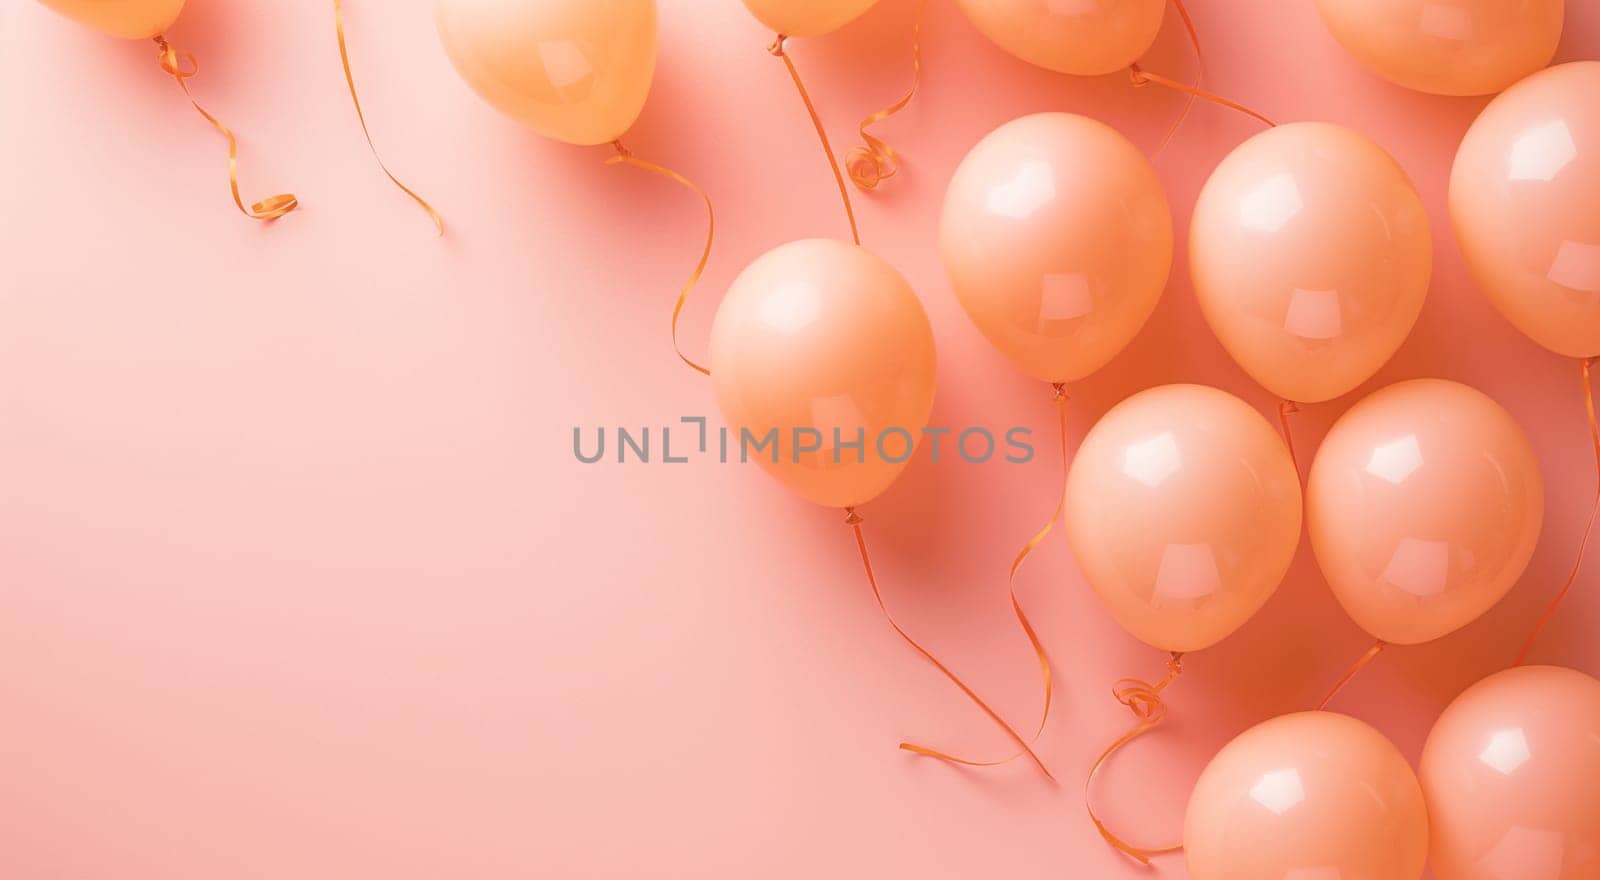 Peach-colored balloons on a soft pink background, festive and airy feel by kizuneko